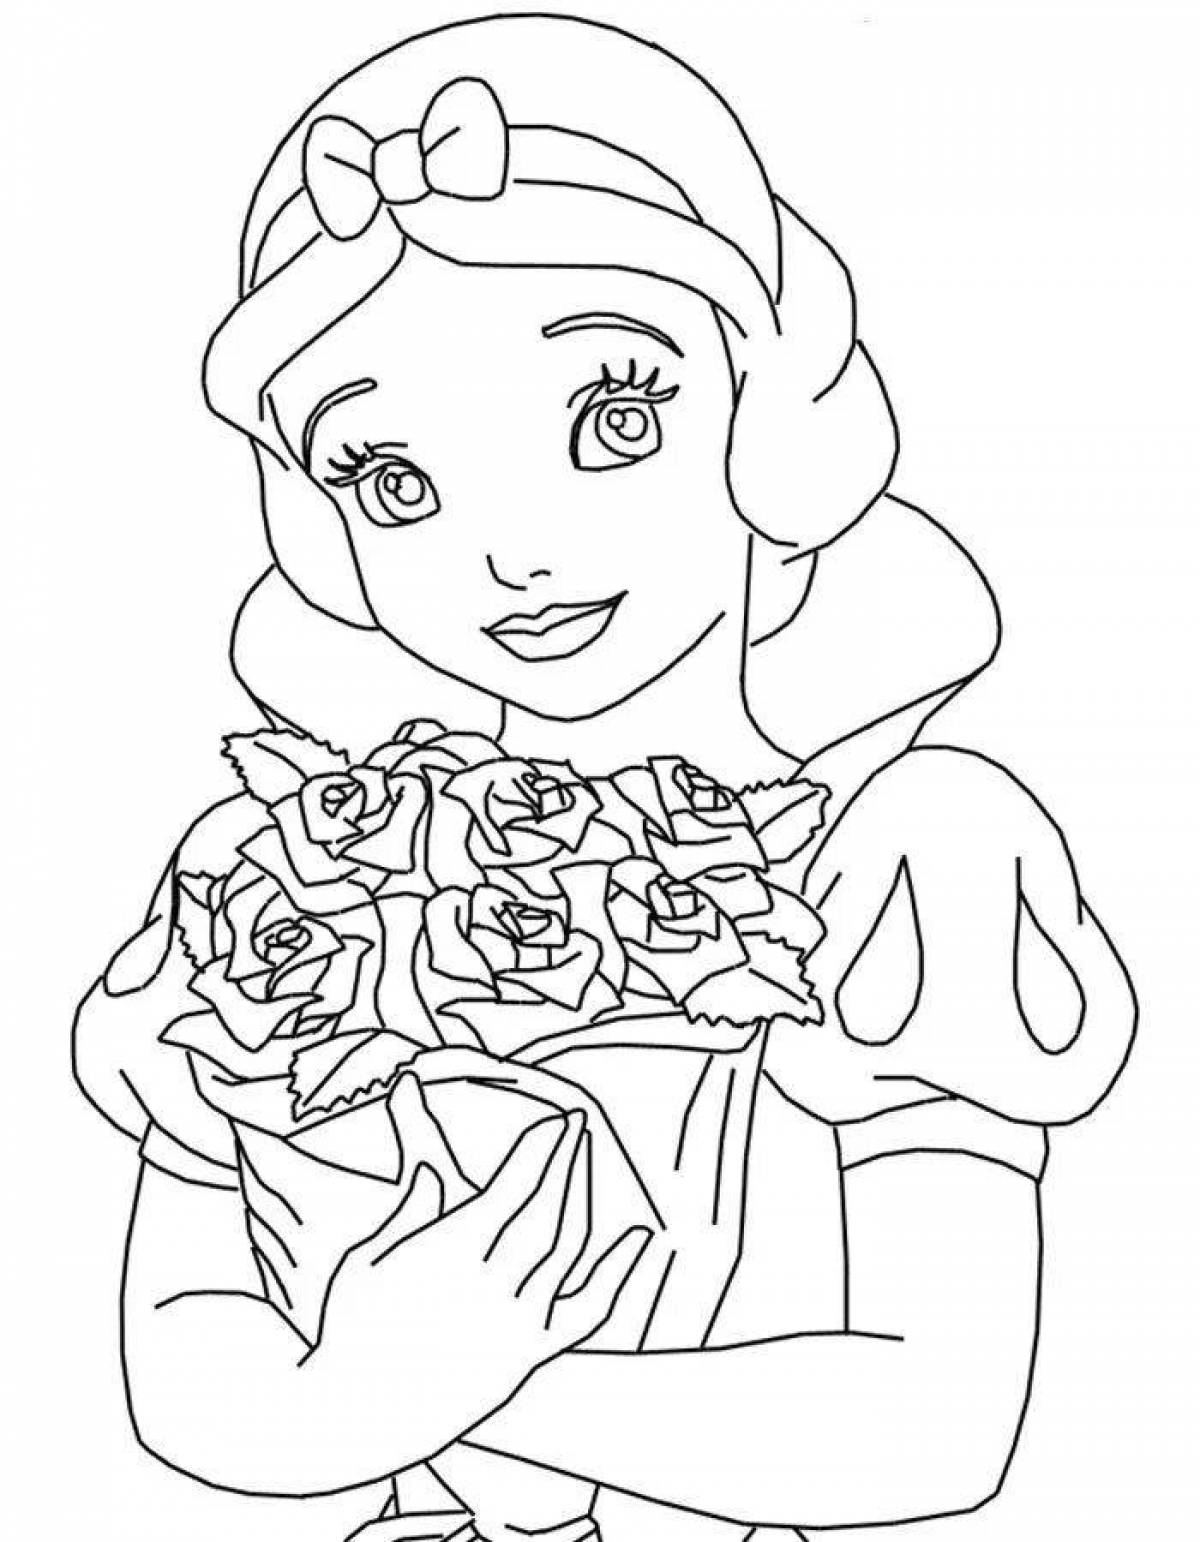 Coloring book glowing snow white princess